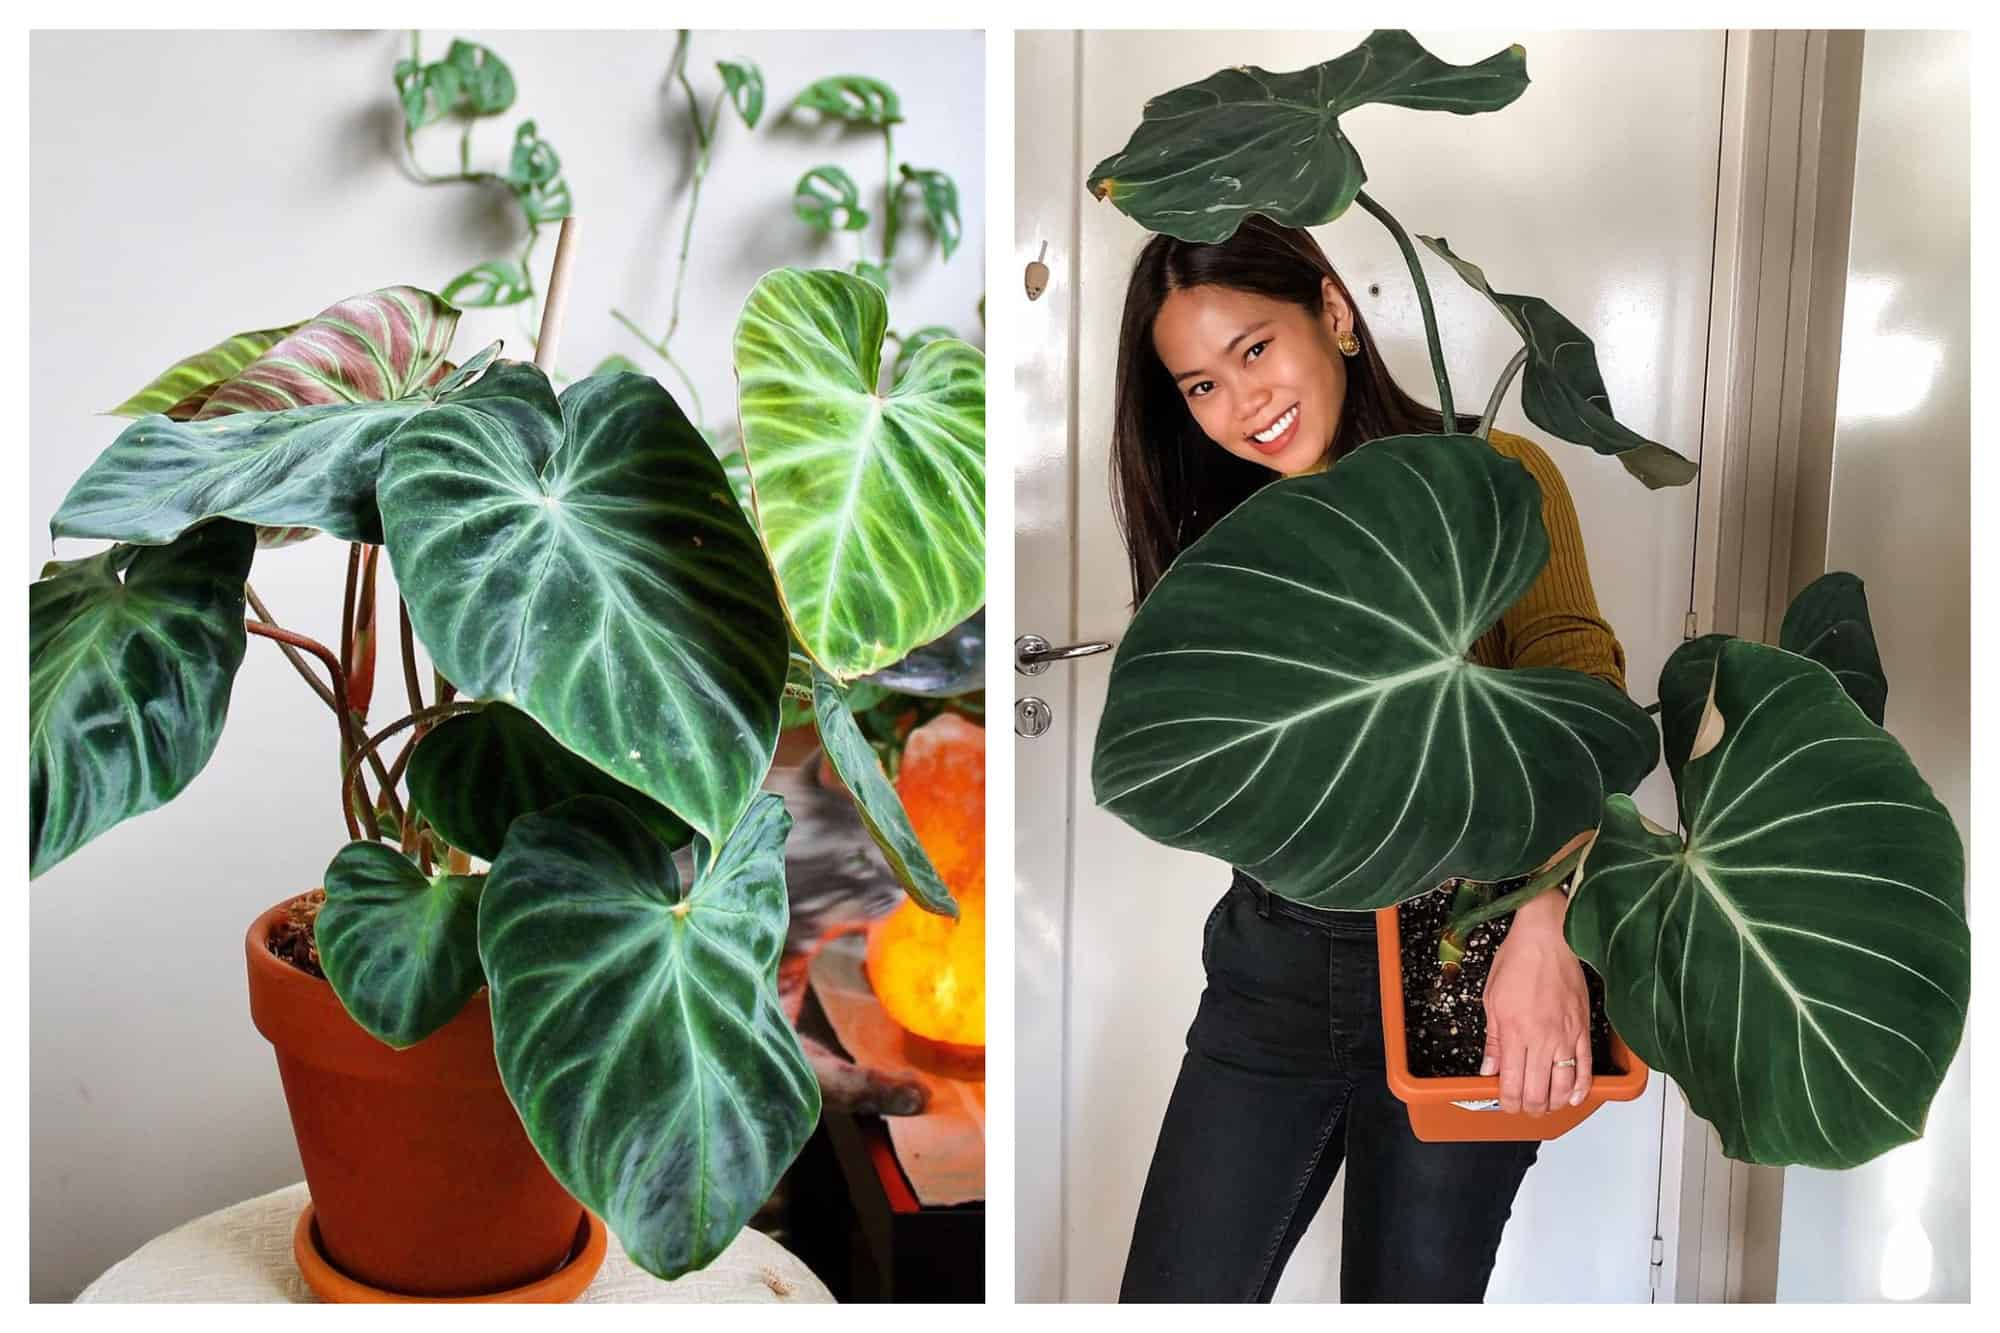 Left: A picture of a rare plant from Central to South America called Philodendron verrucosum, which is well-coveted for its velvety but bright leaves. Right: A picture of the author of this post holding her giant Philodendron gloriosum, a rare plant with  huge heart shaped and velvety leaves.